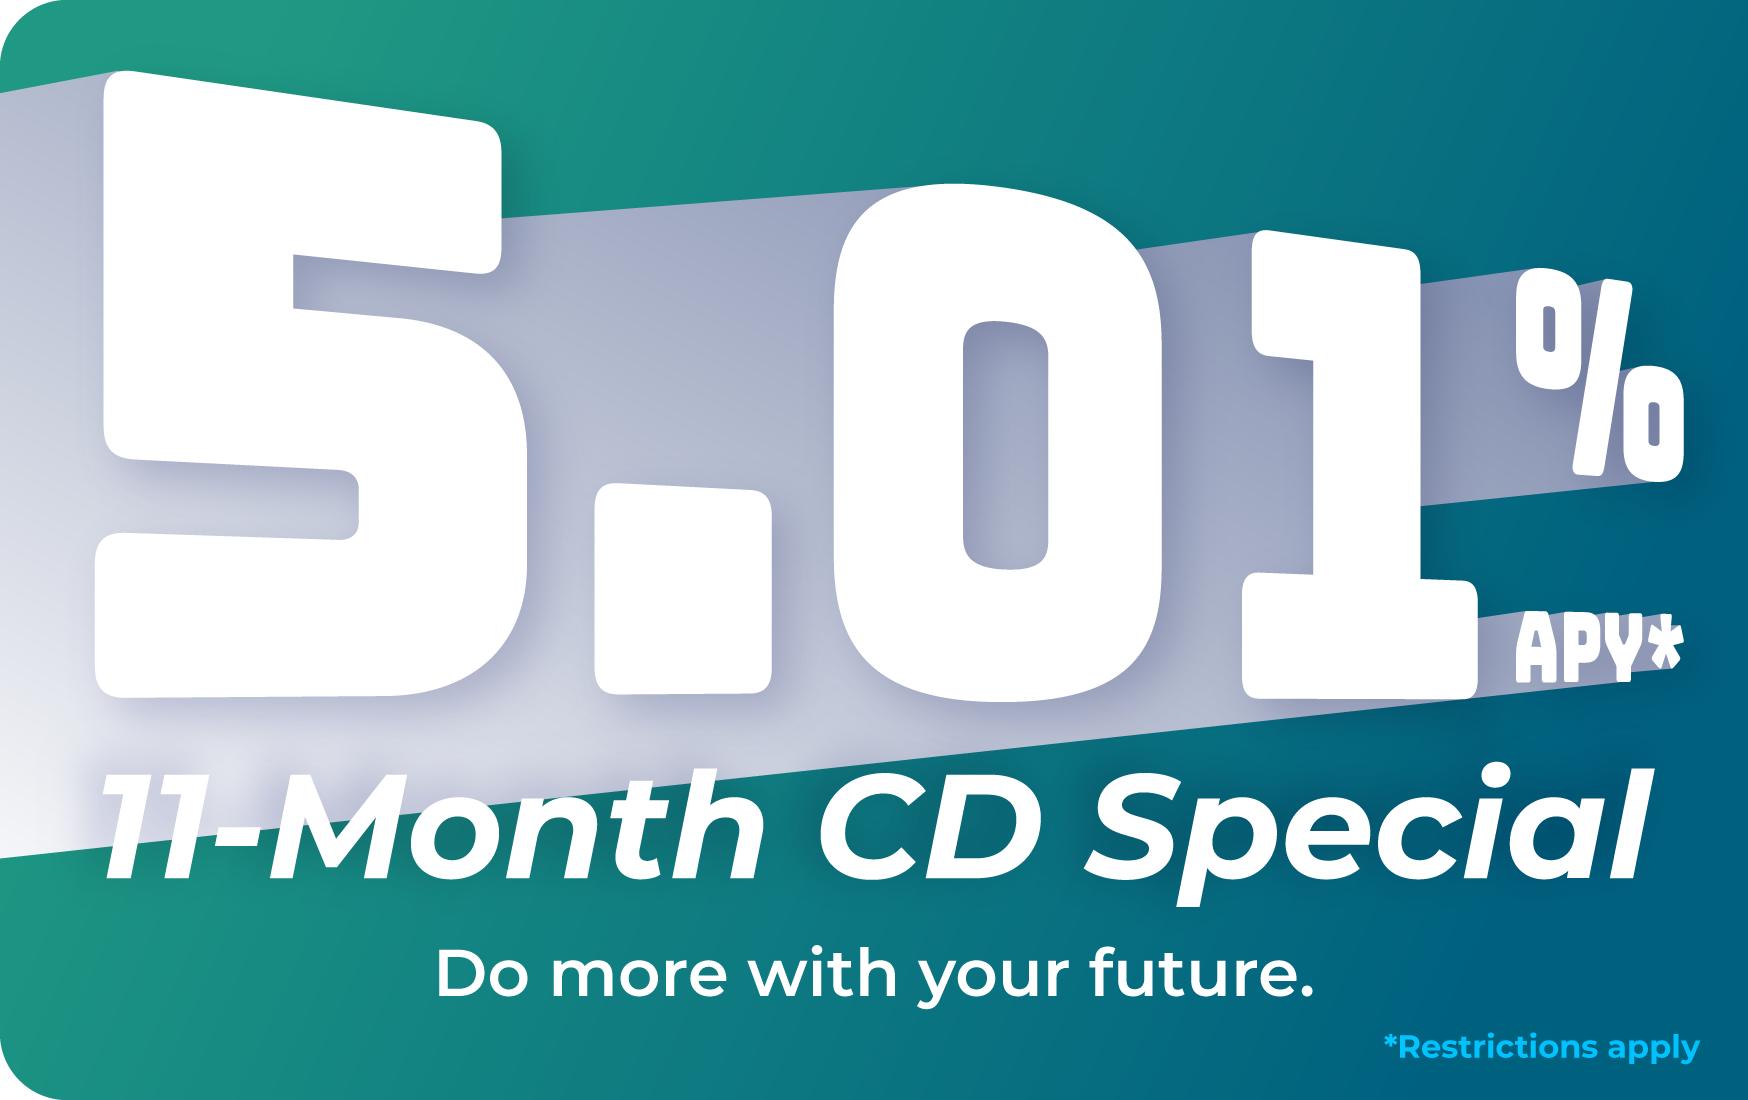 11-Month CD Special - 5.01% APY Banner